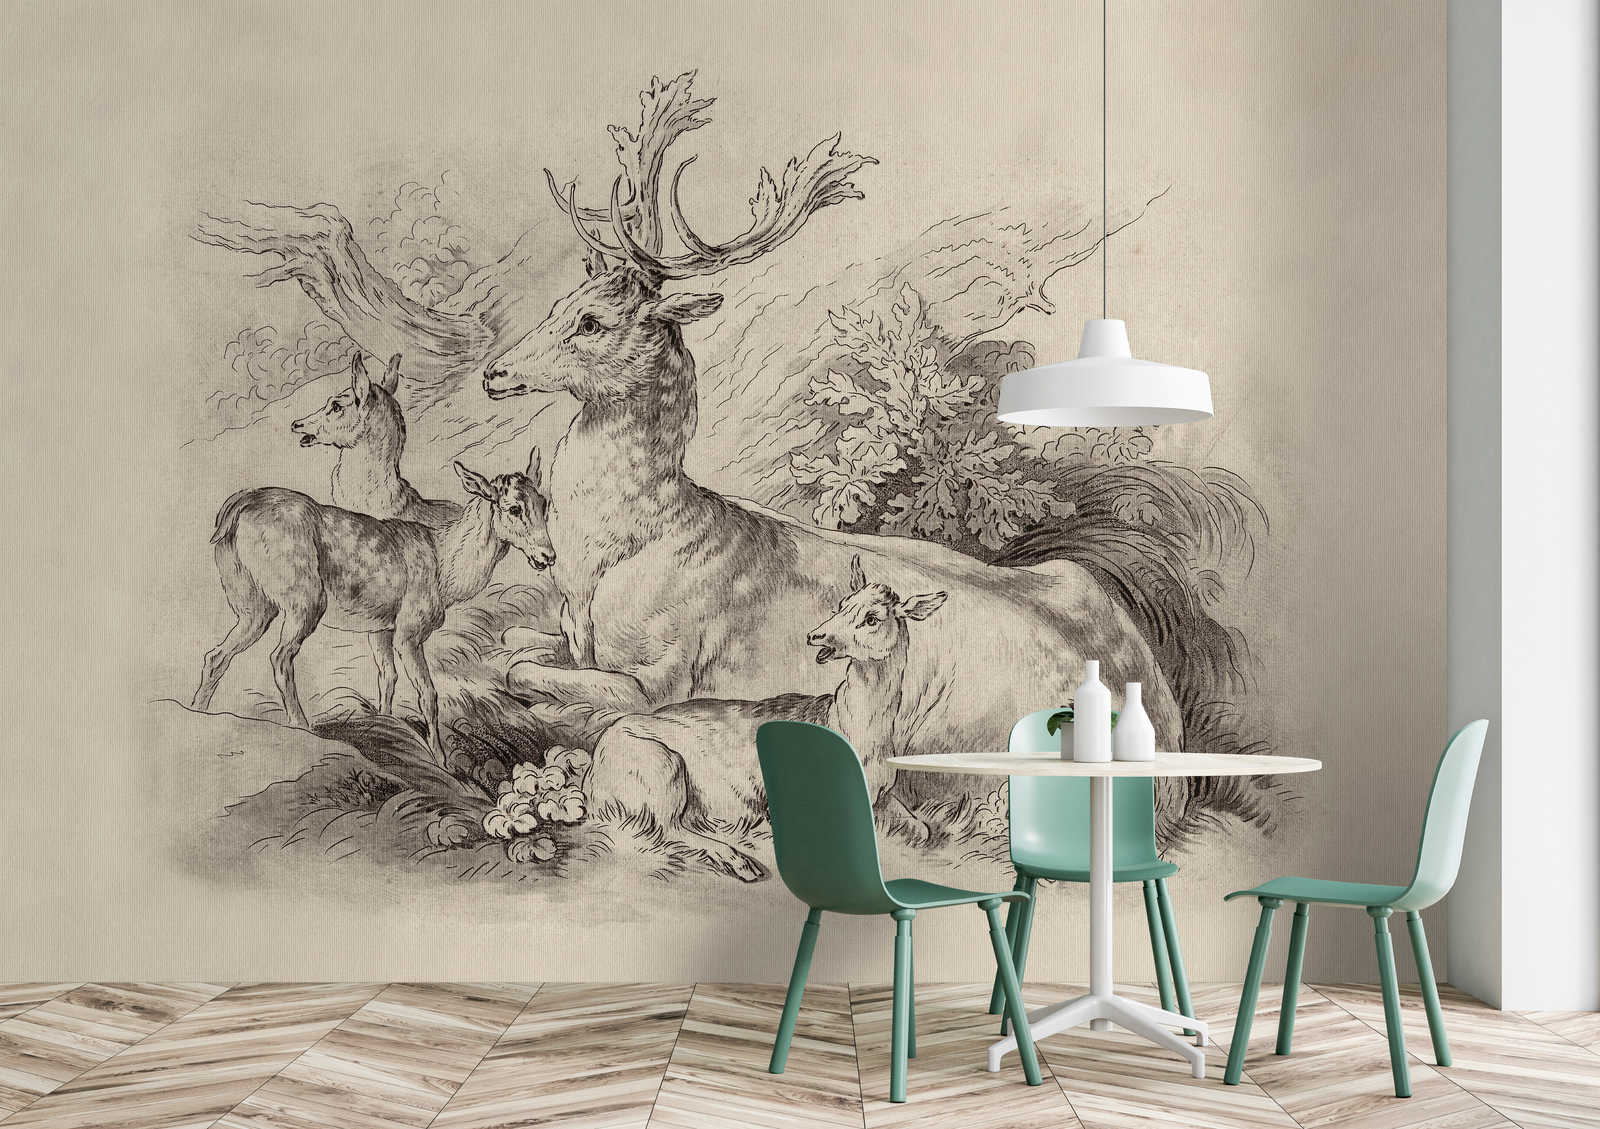             On the Grass 1 - photo wallpaper deer & stag vintage drawing in beige
        